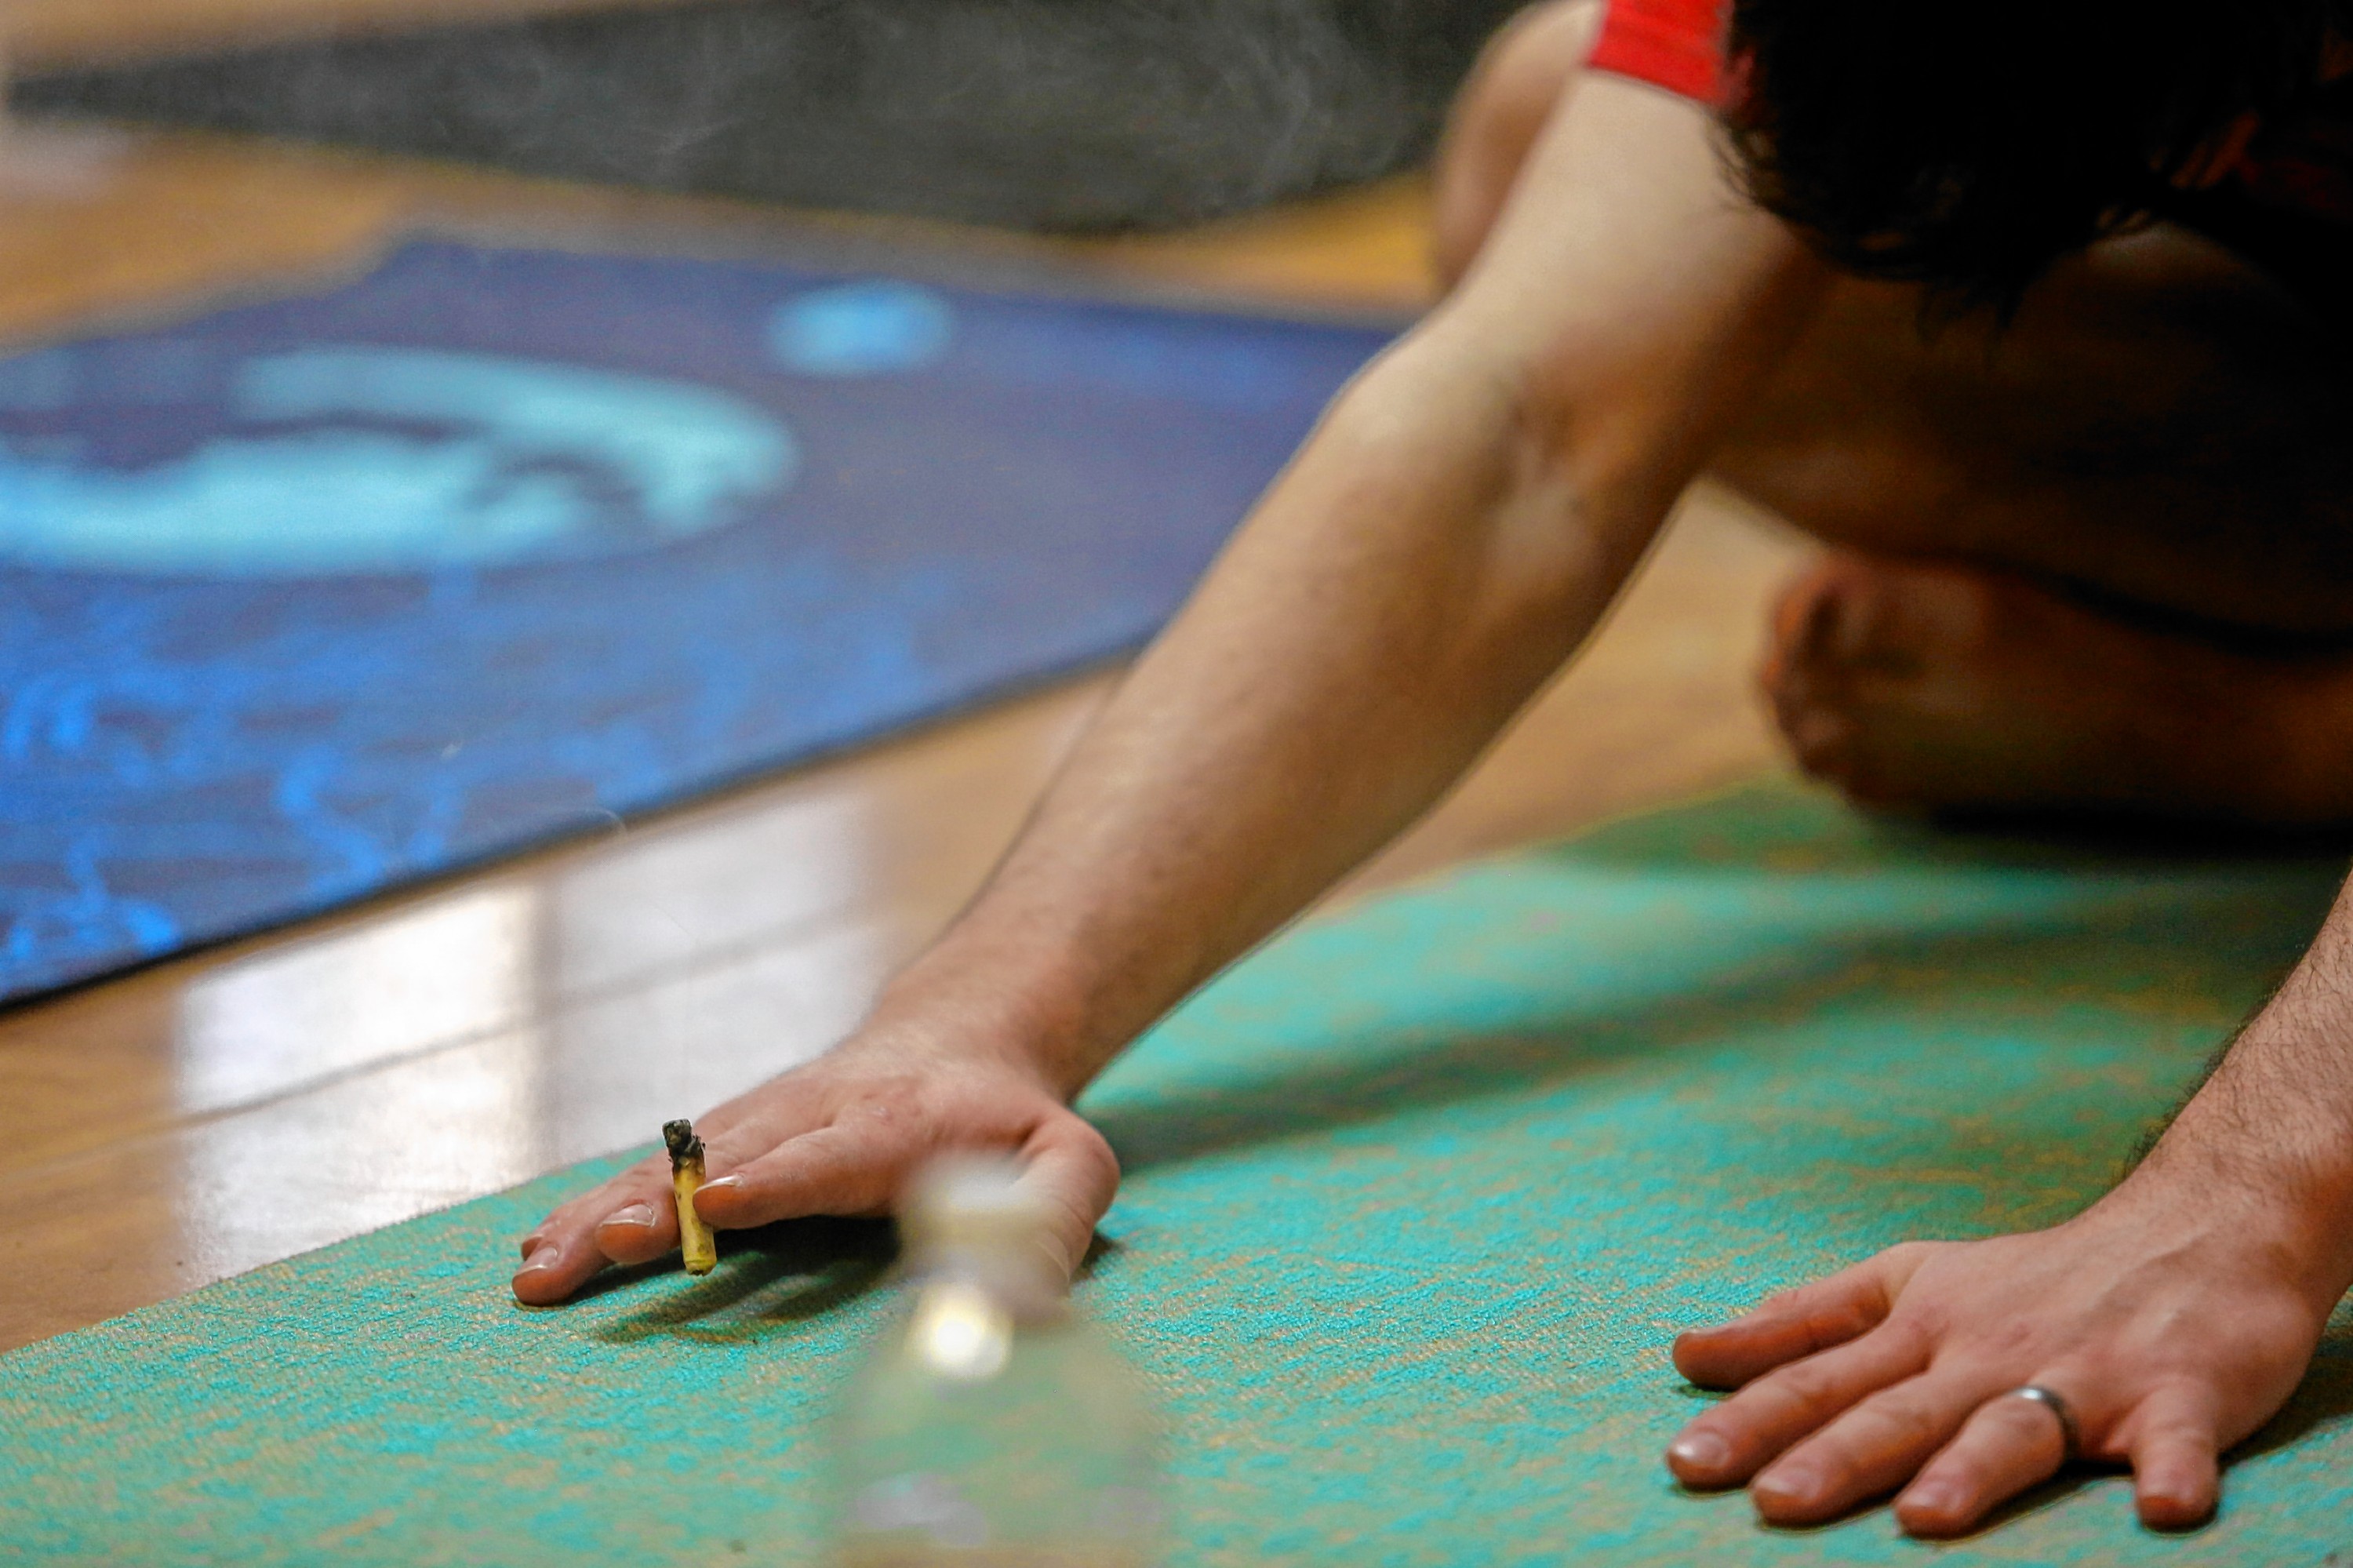 O’ Cannabis! Inhale, Exhale: Cannabis friendly yoga comes to the Valley